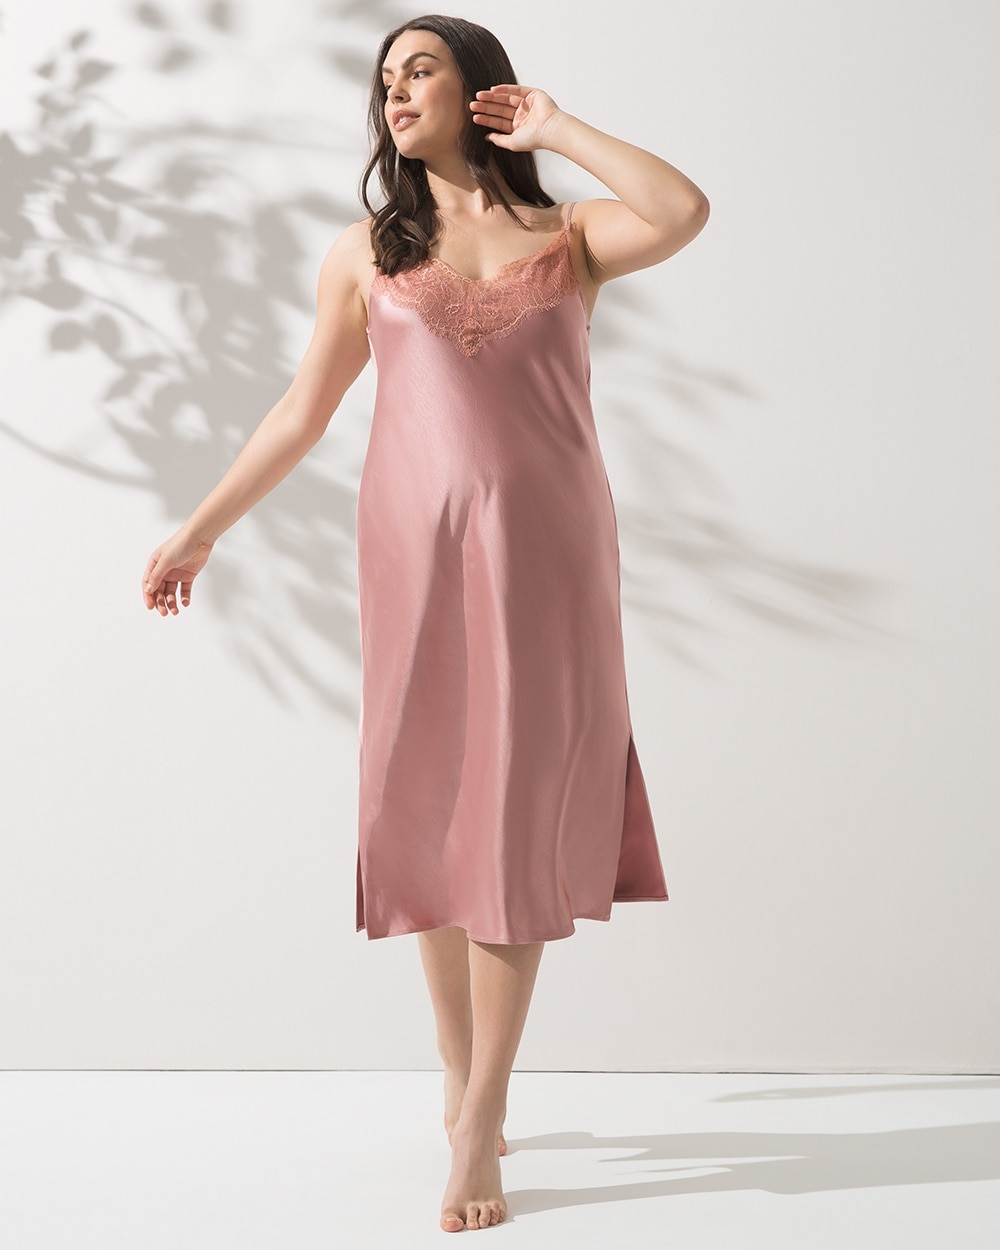 Sensual Satin Chemise with Lace Trim